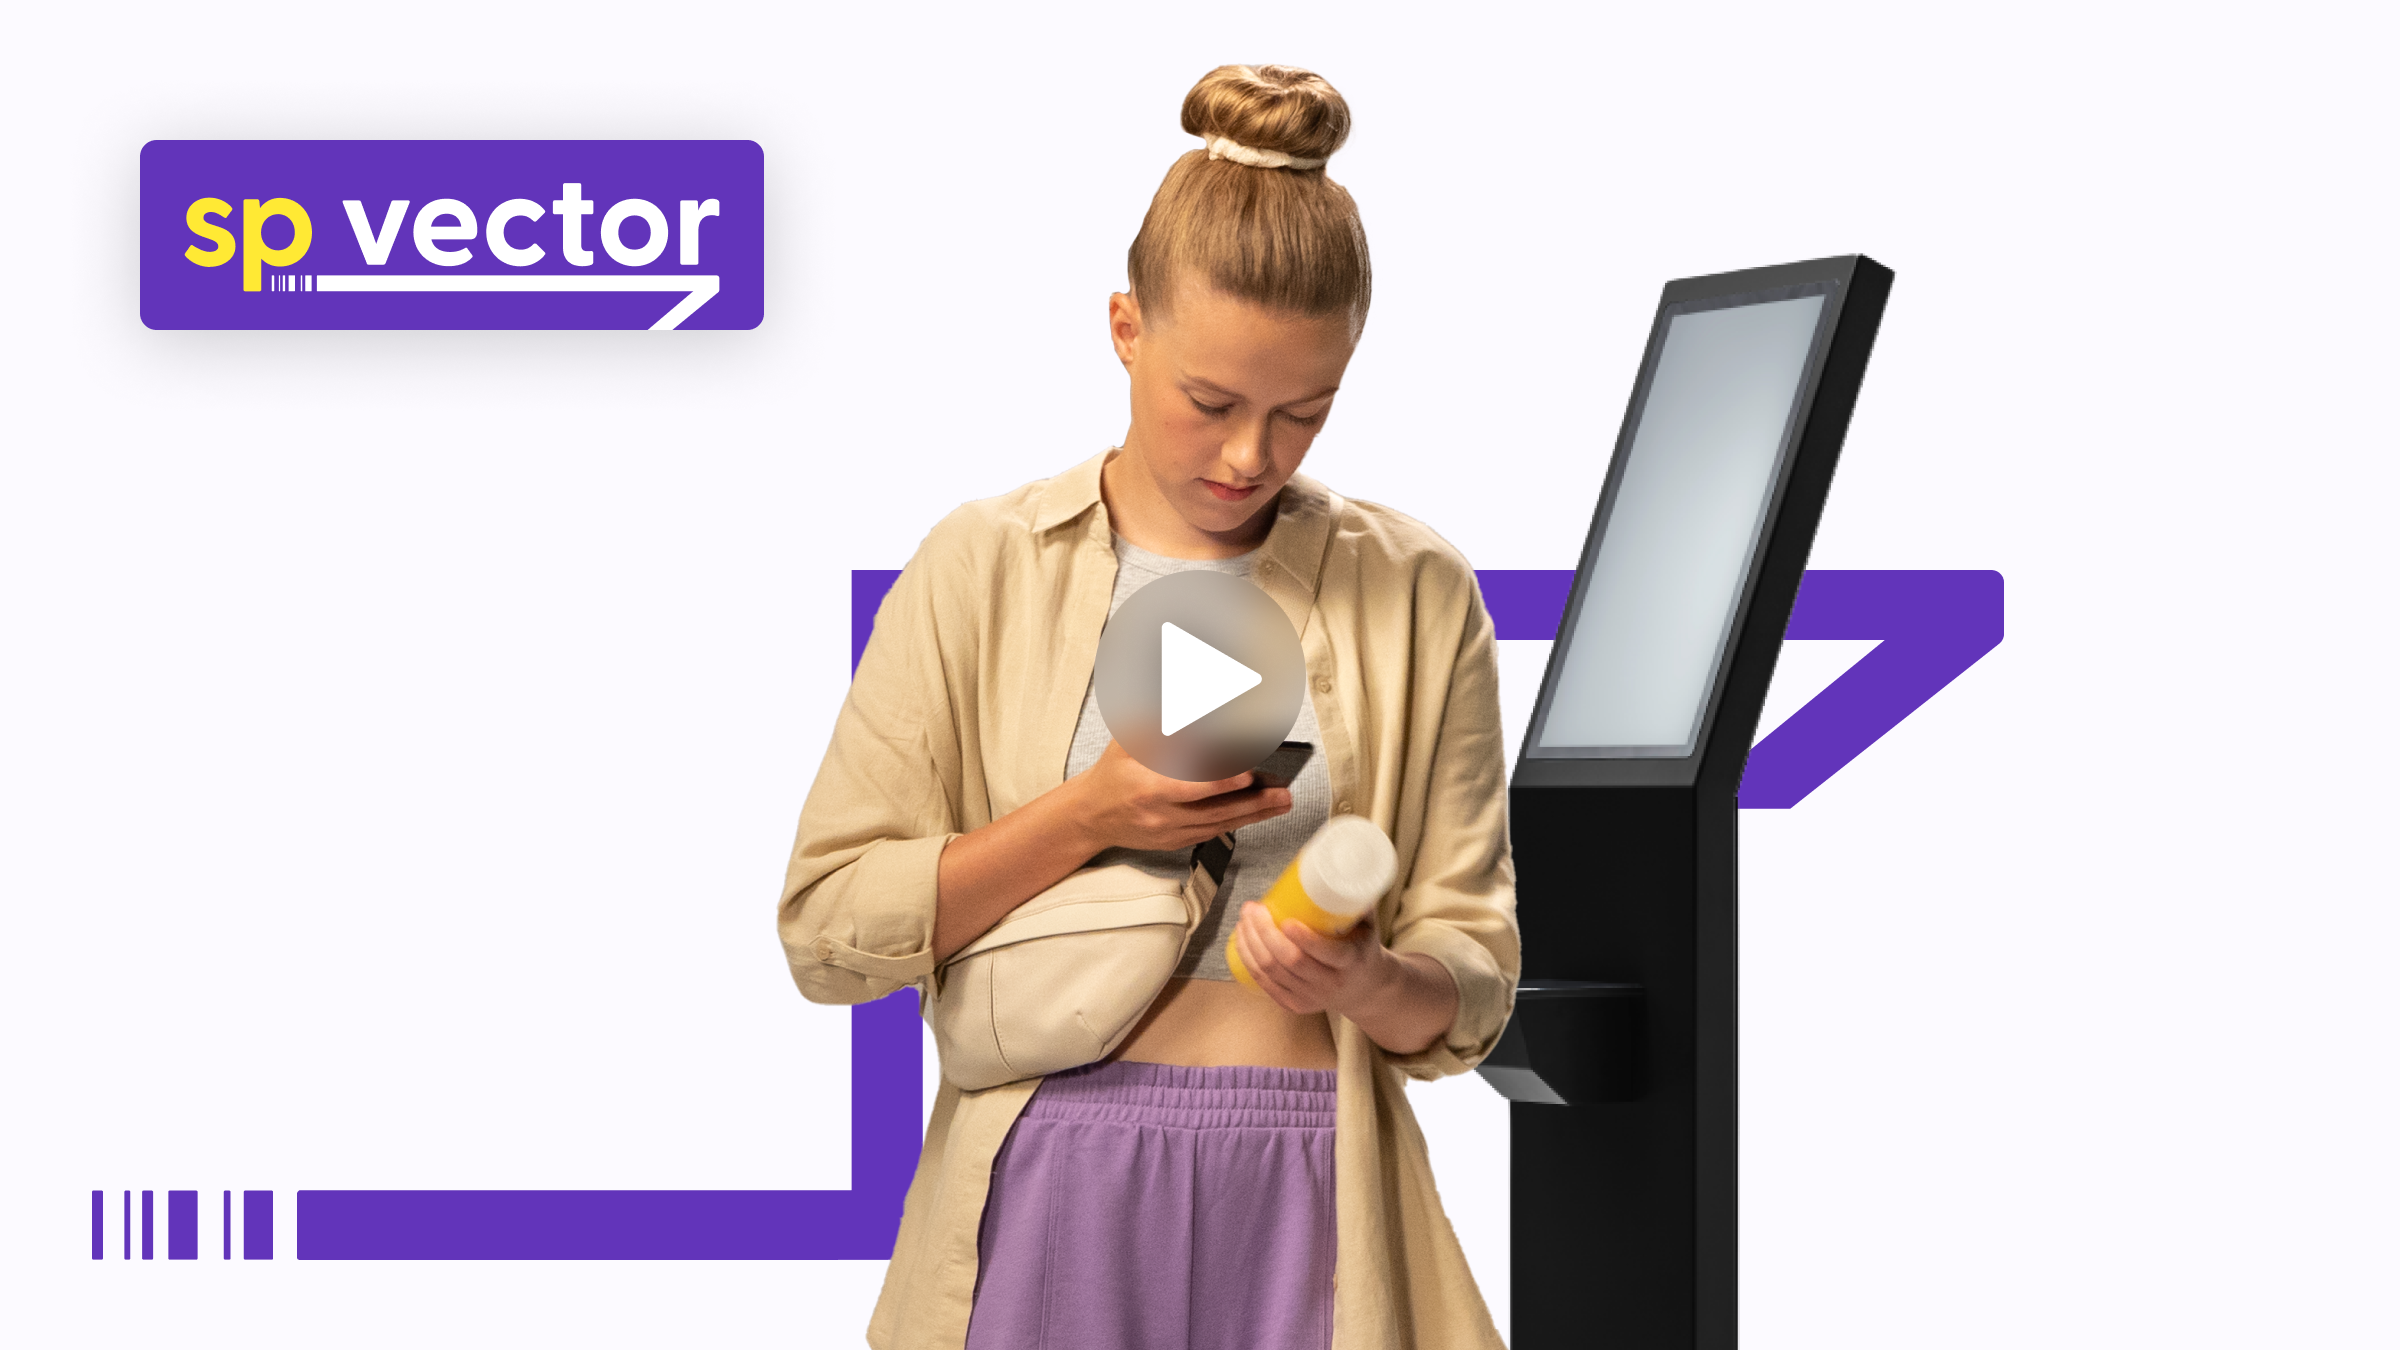 shopreme vector – The Scan & Go Optimized Exit Solution